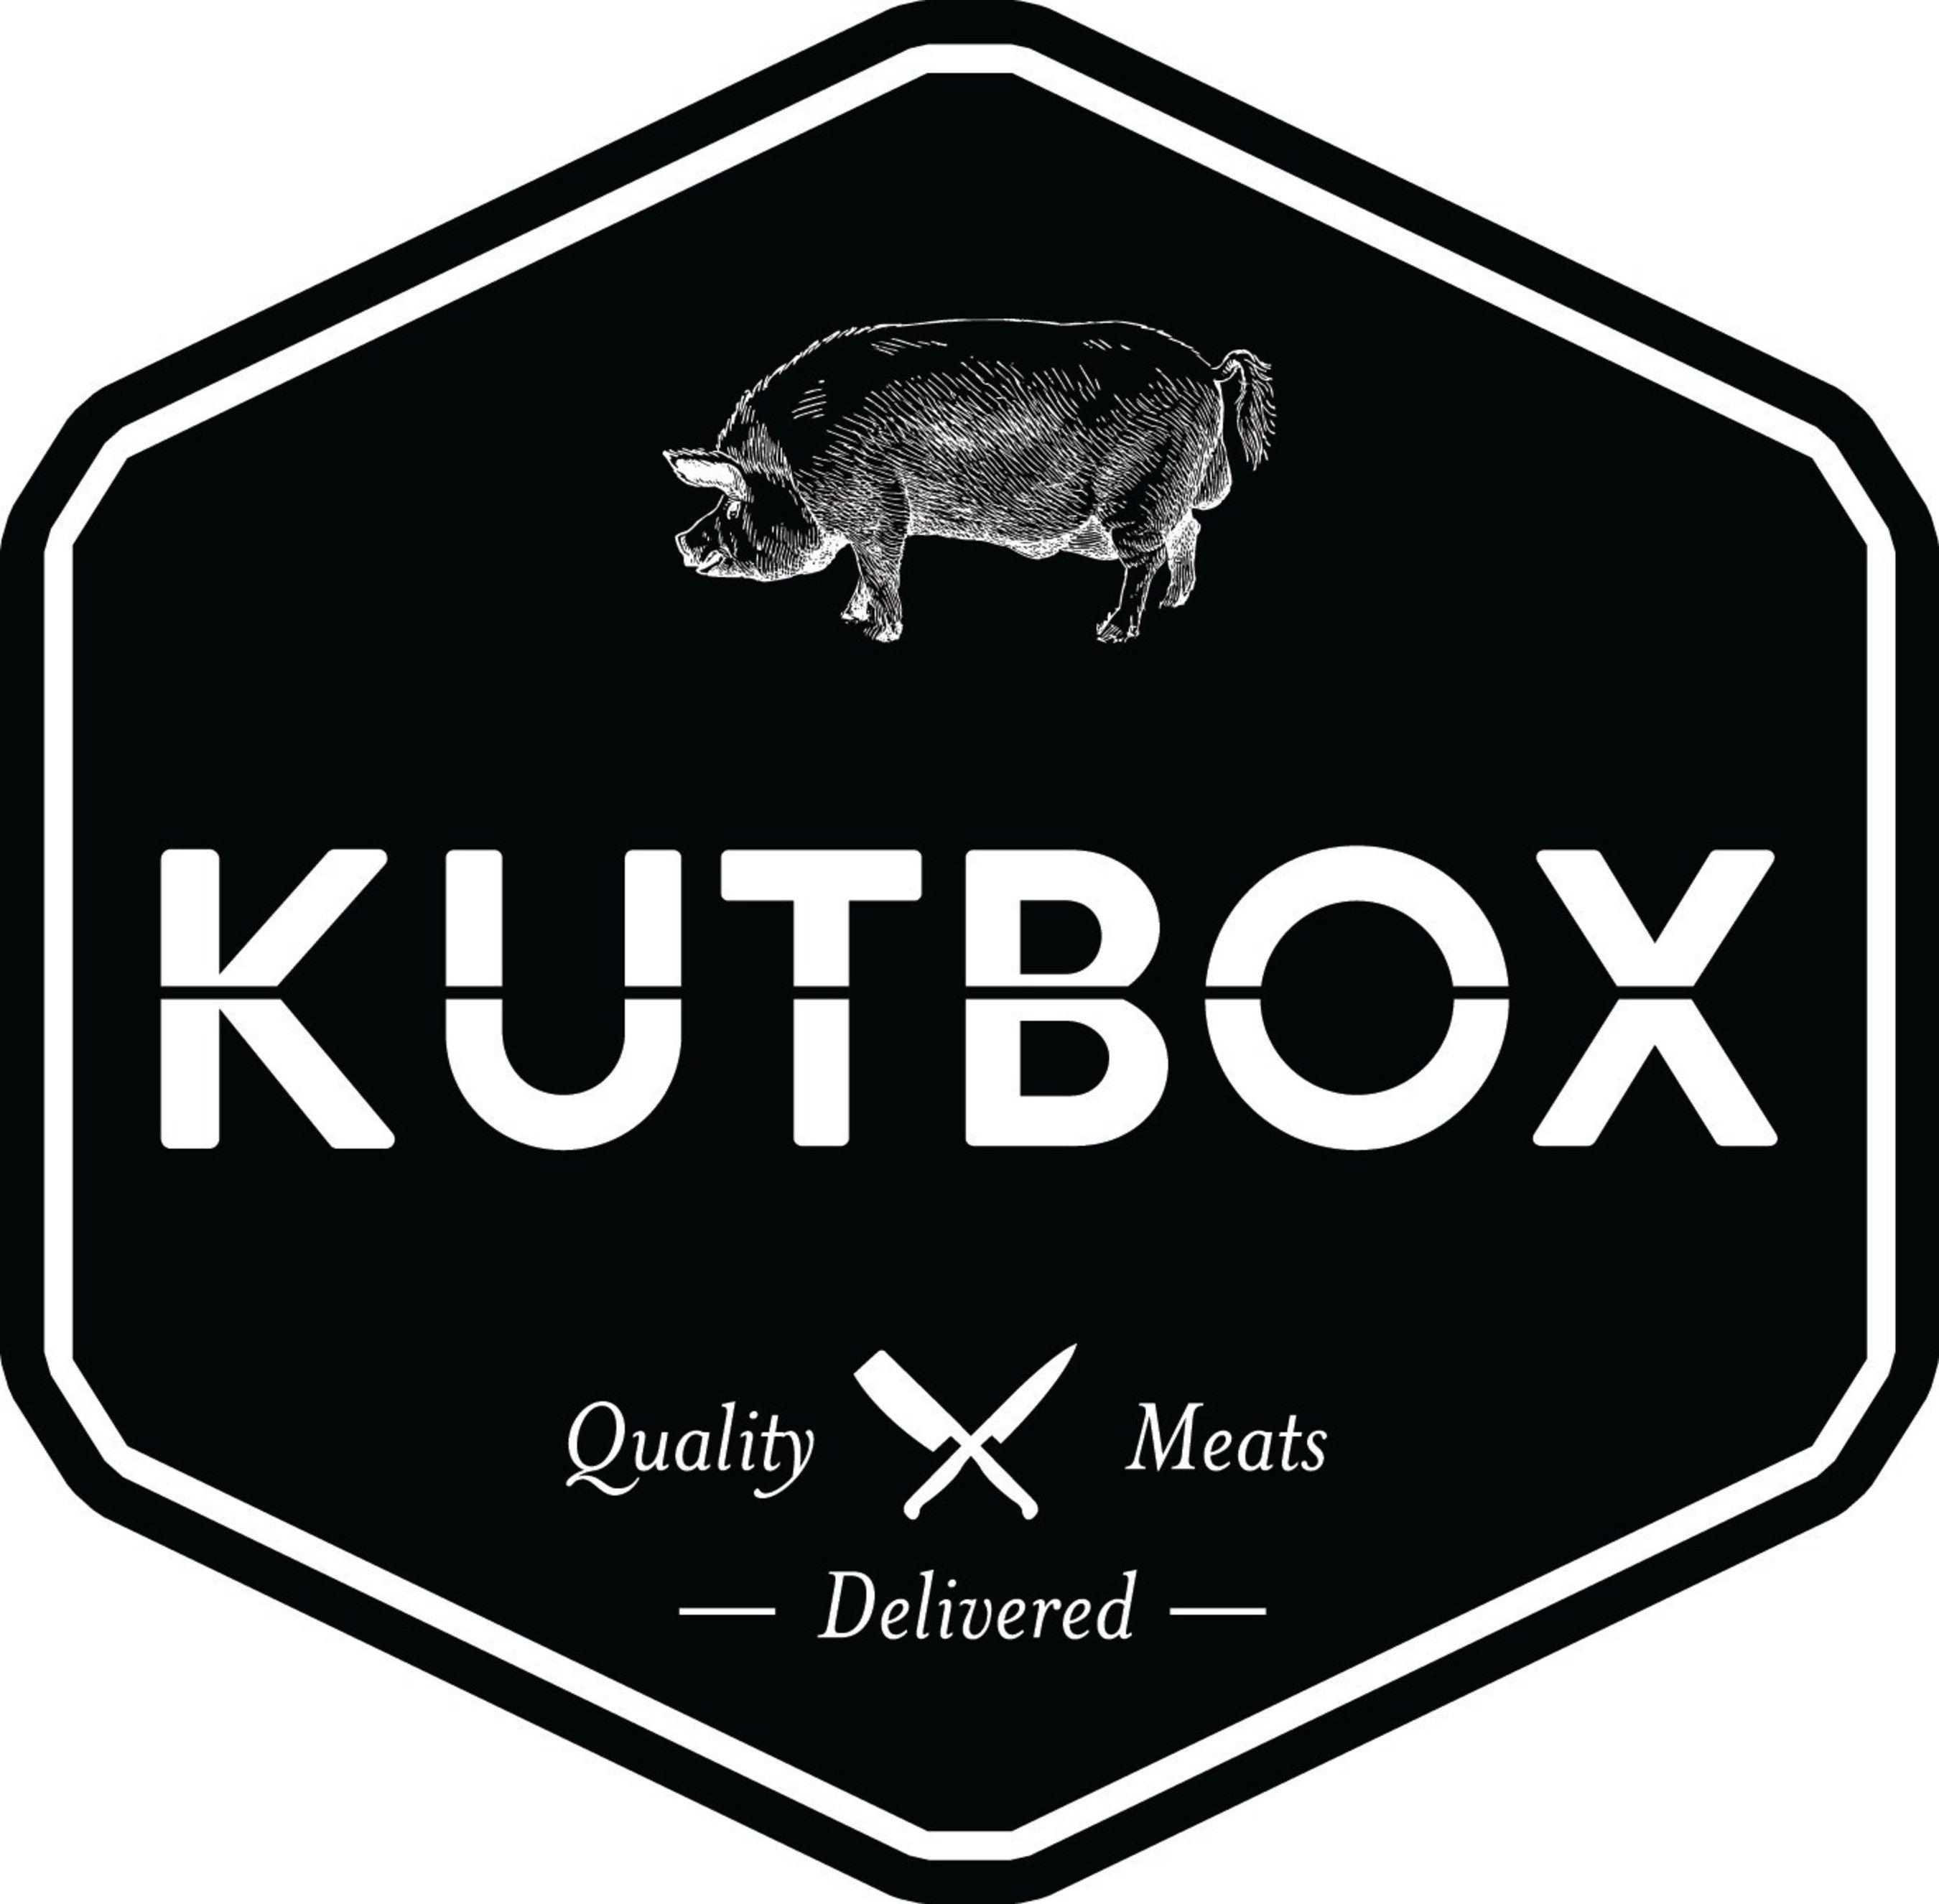 Small Meat Logo - Access To Quality Meat From Small, Sustainable Farms Across